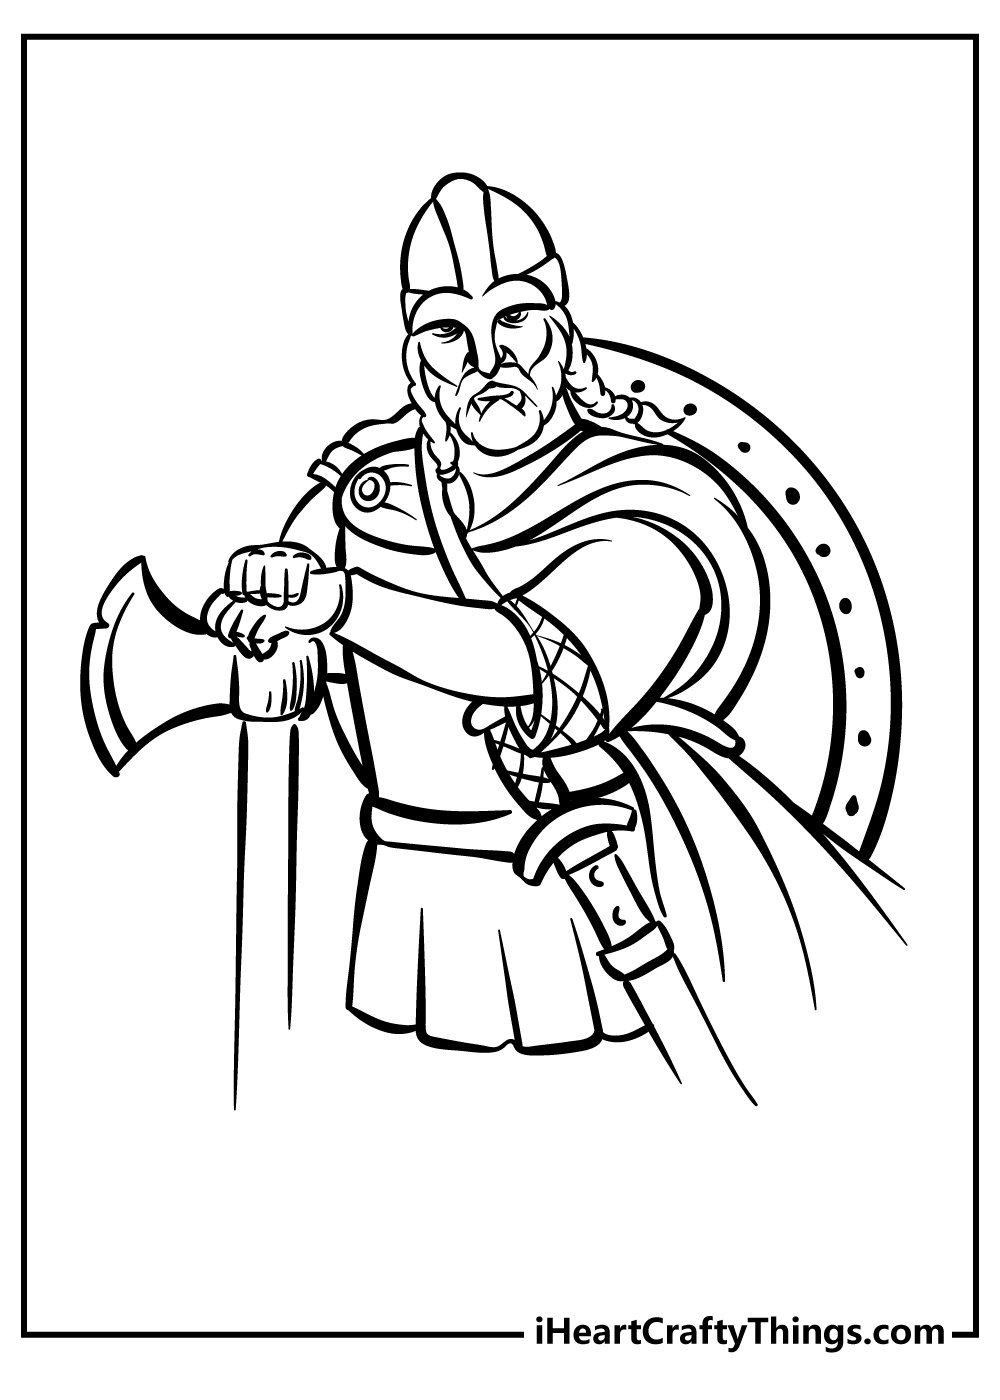 Viking Coloring Pages for kids free download